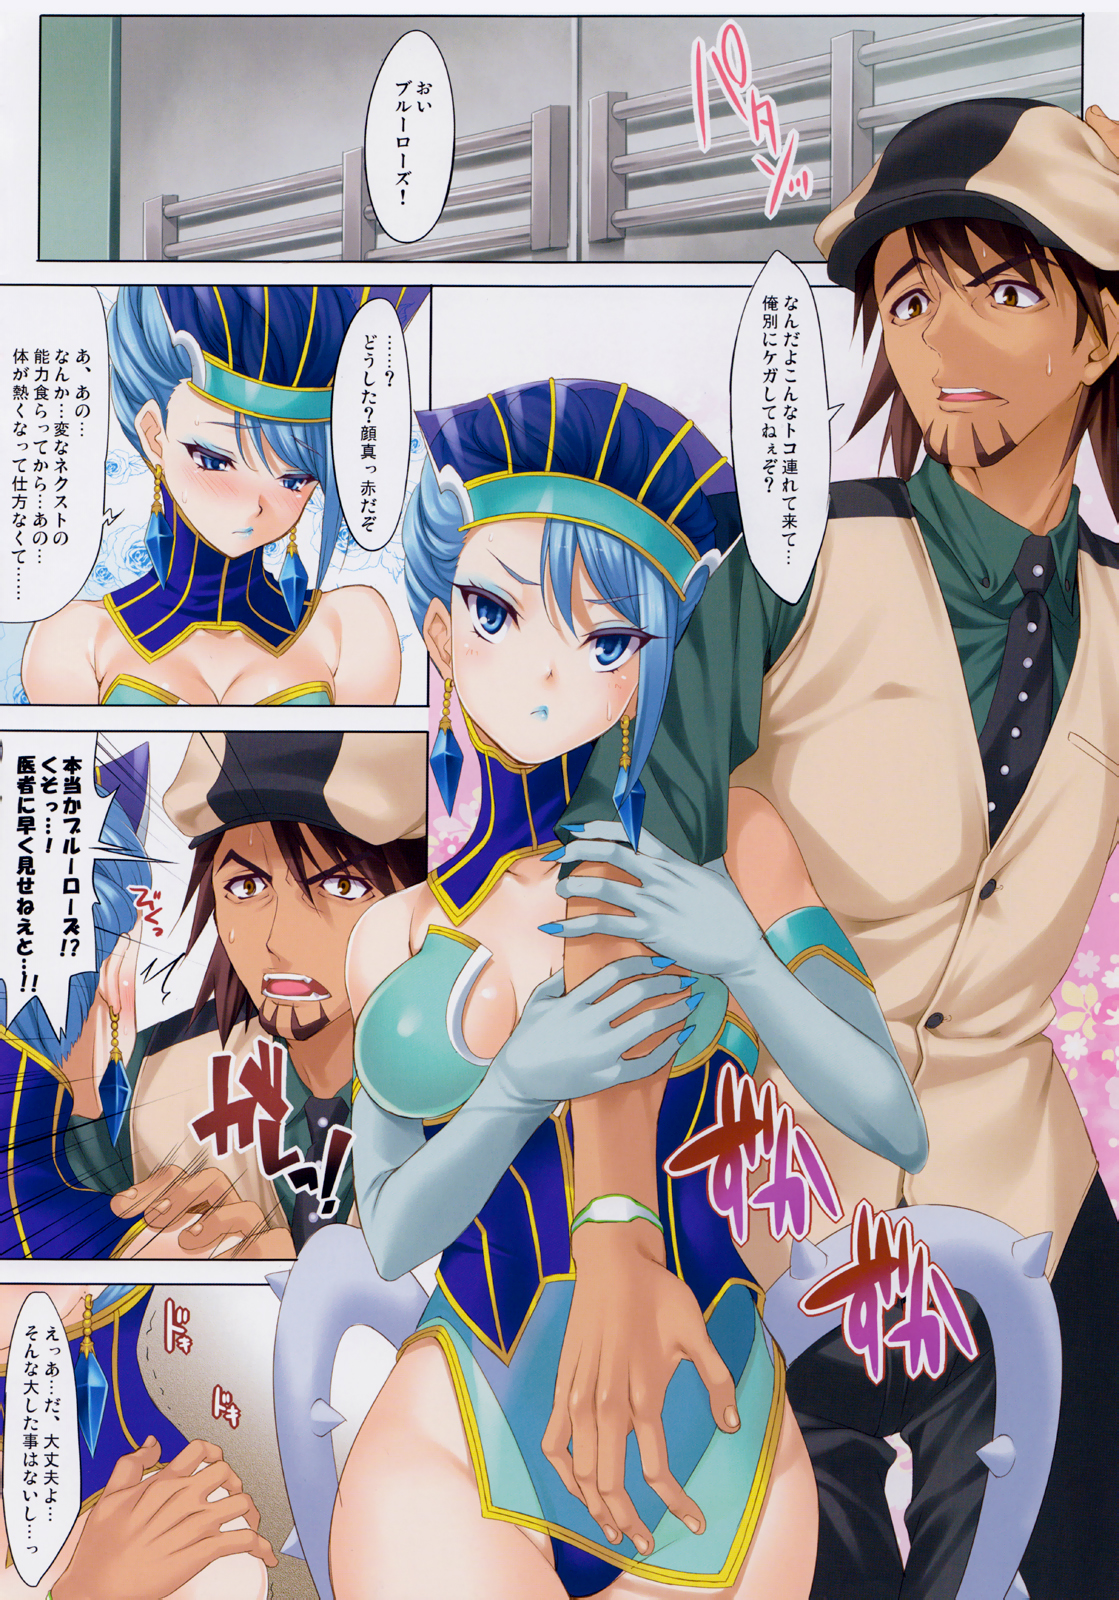 [clesta (Cle Masahiro)] CL-orz 18 (TIGER & BUNNY) [Decensored] page 2 full